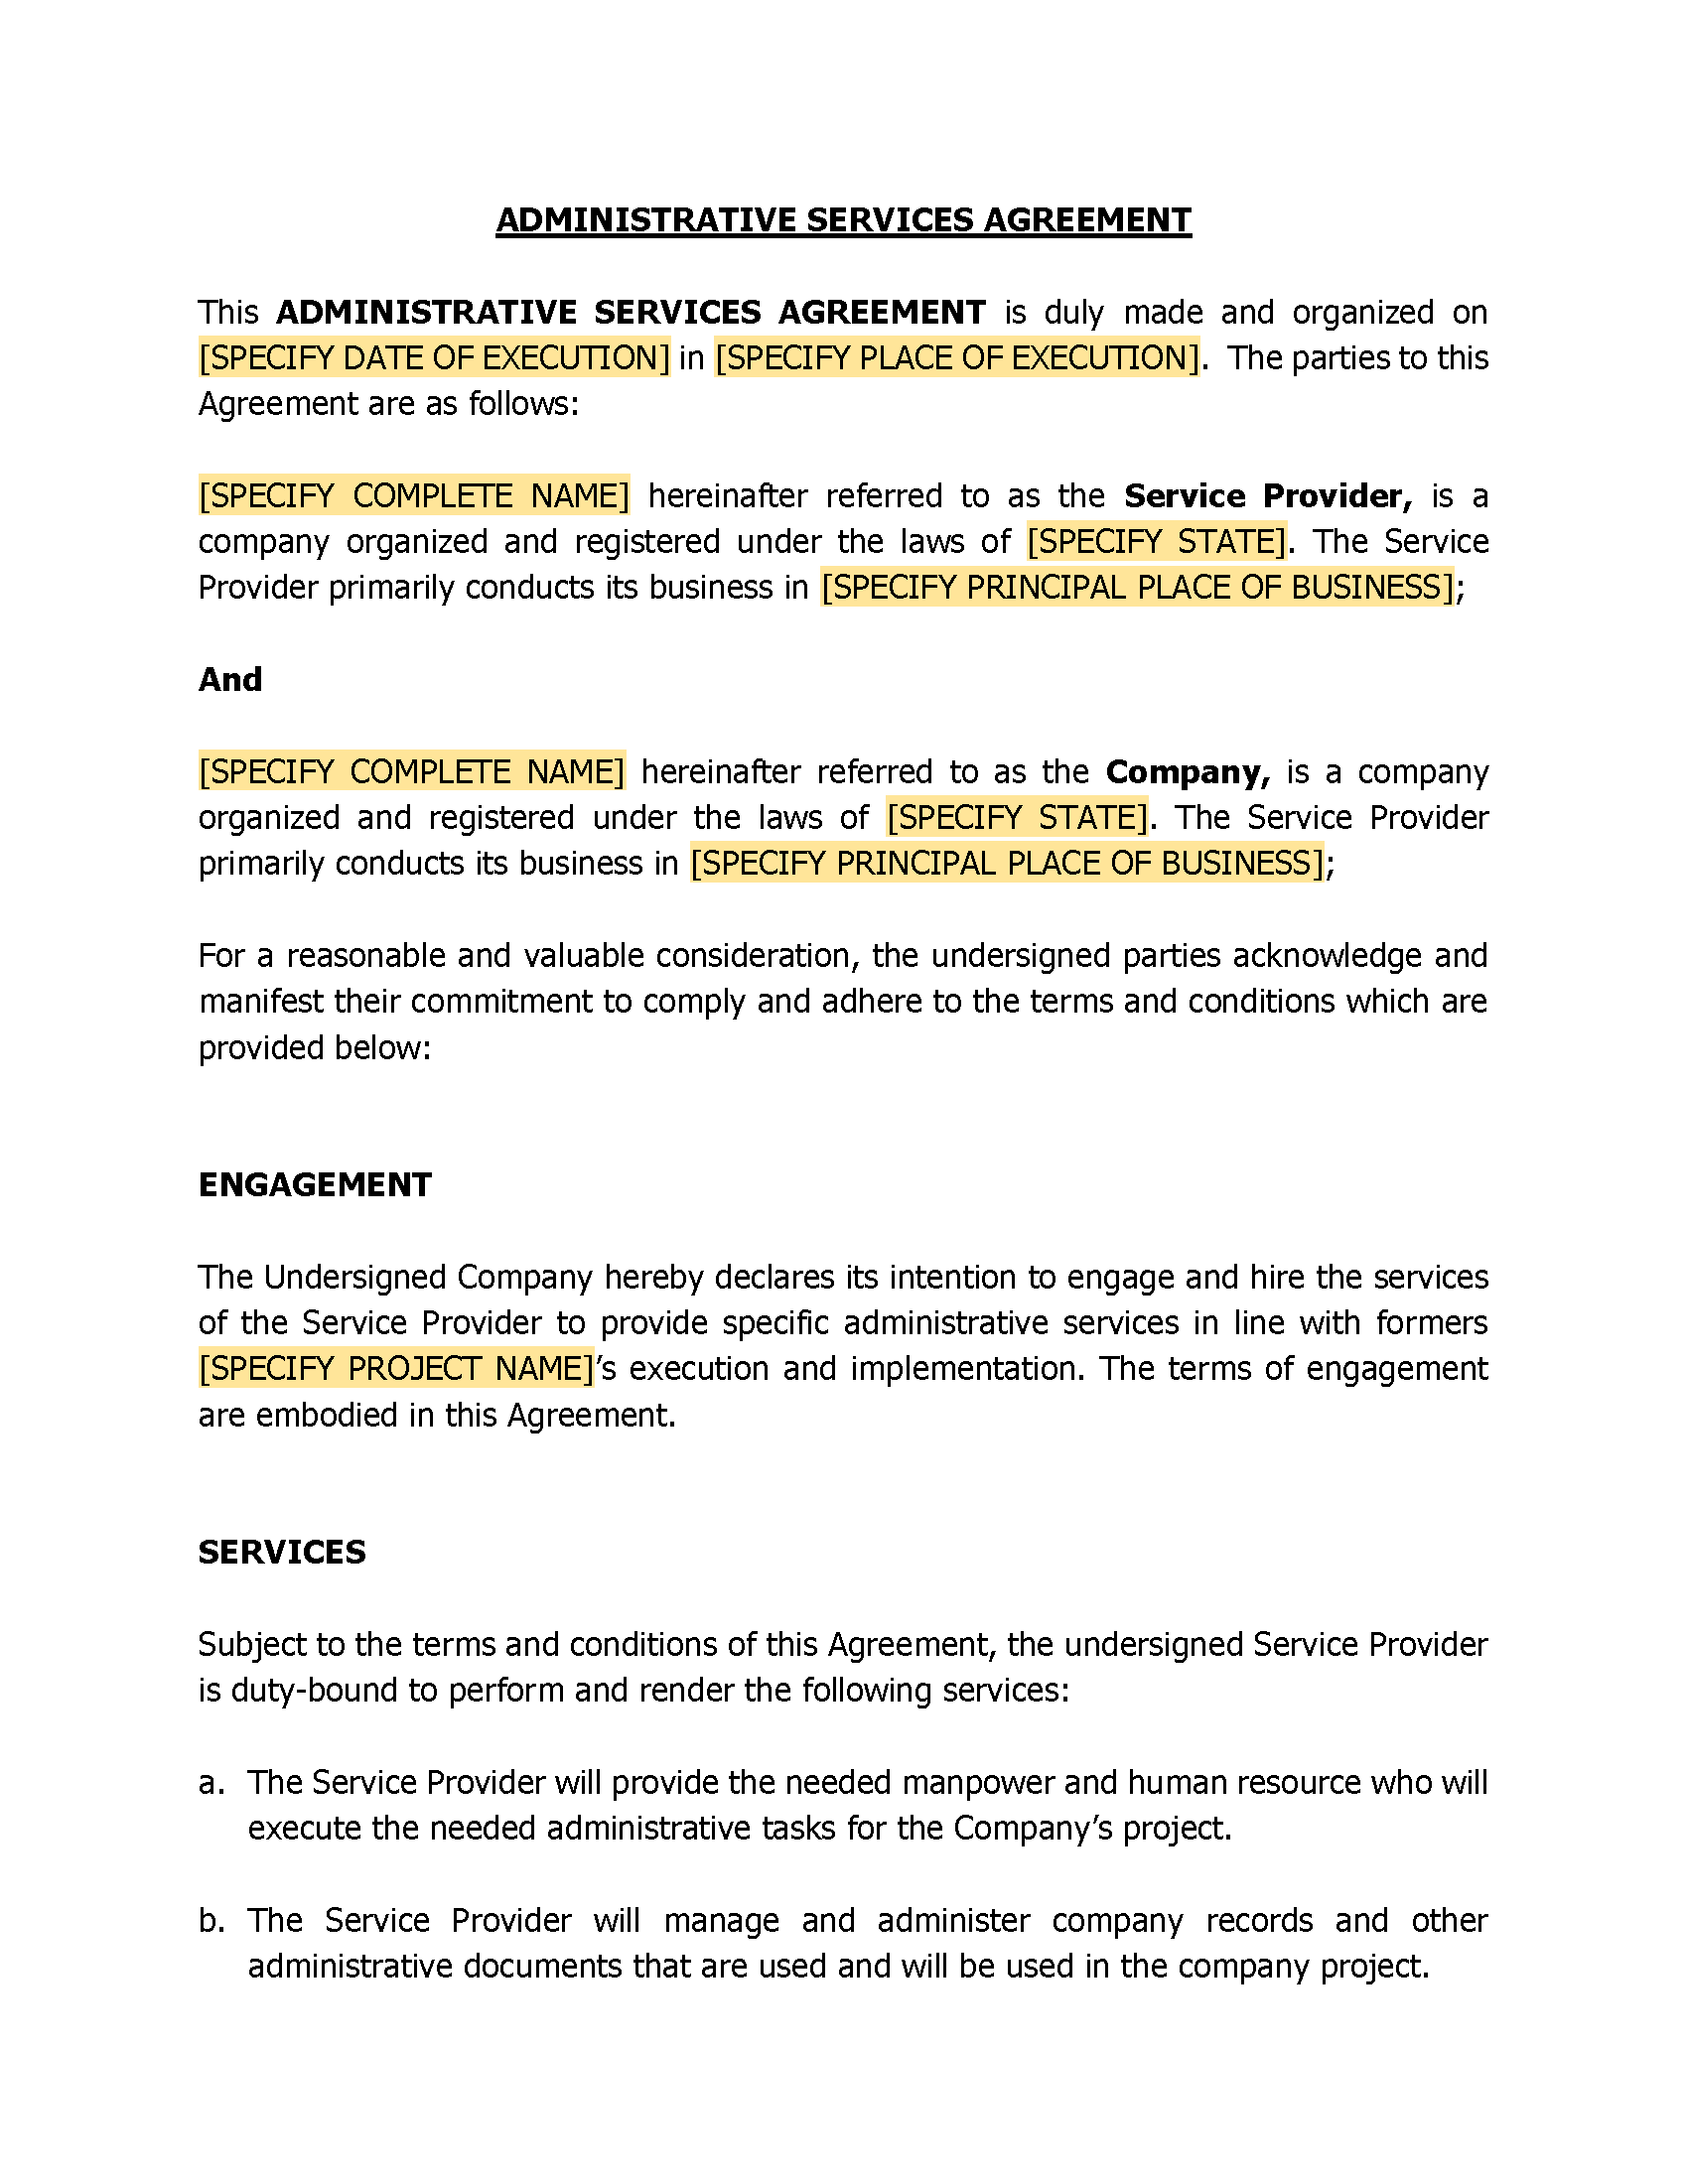 Administrative Services Agreement